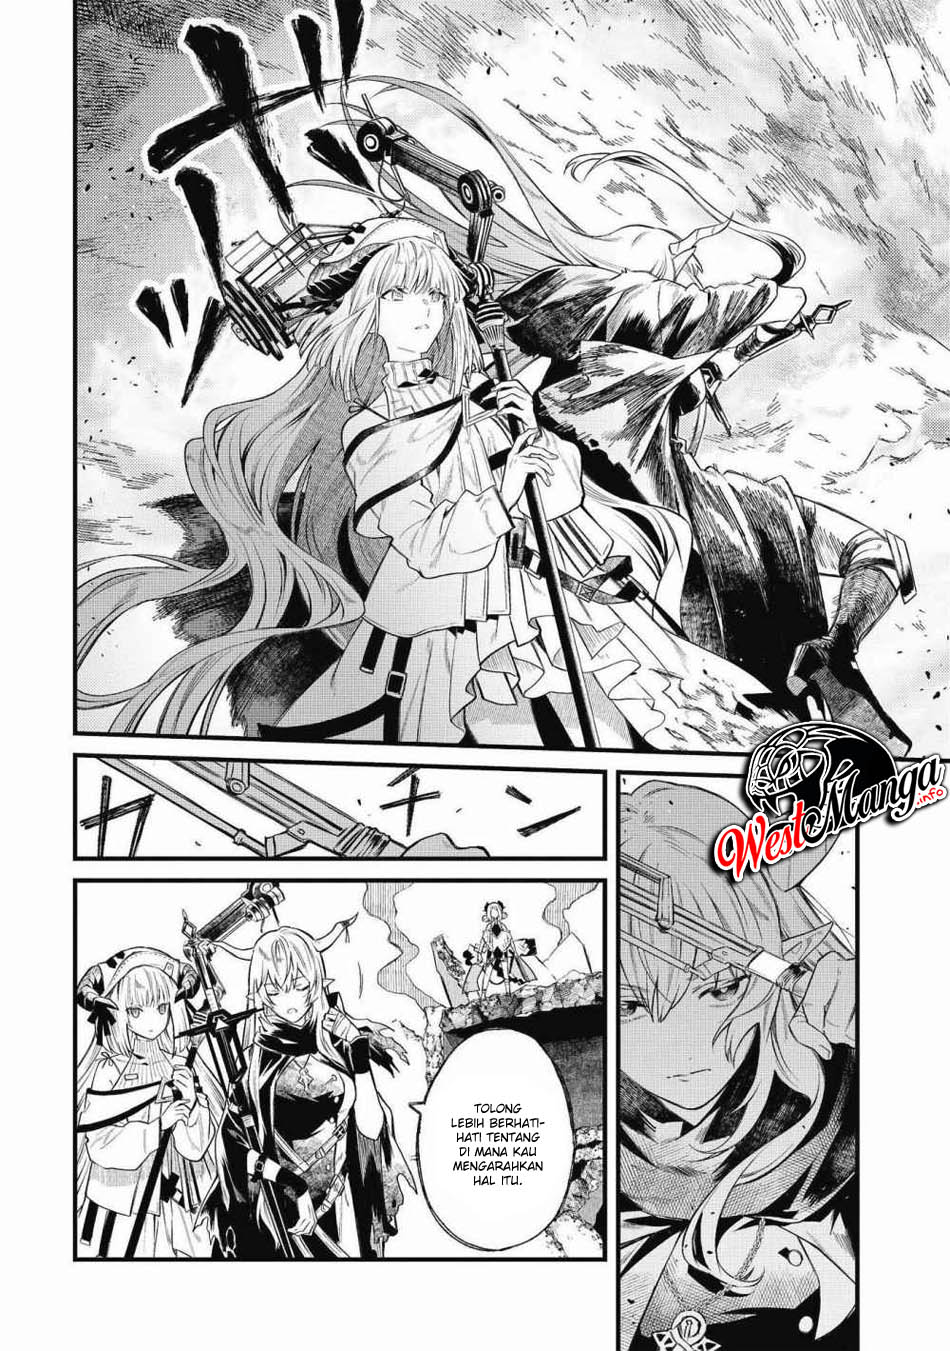 Arknights Comic Anthology Chapter 1